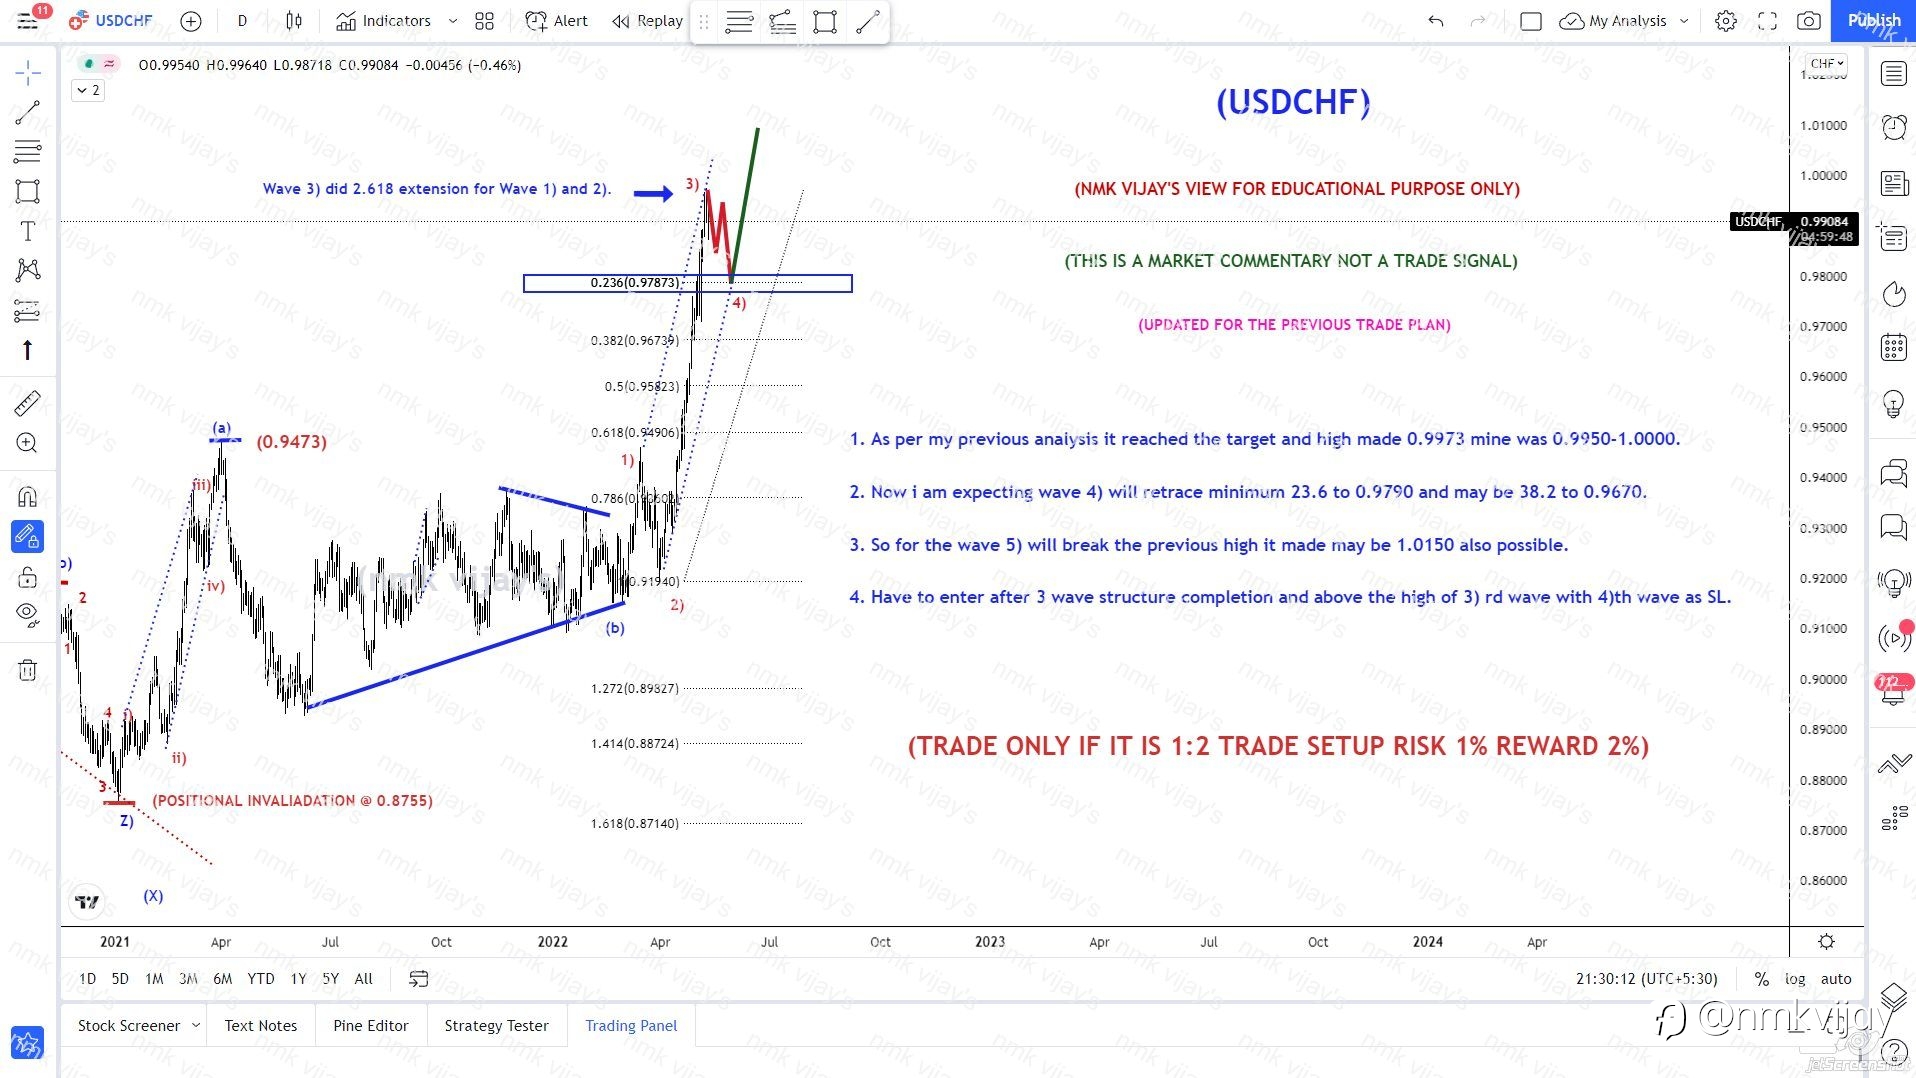 USDCHF-Target got achieved, now to 1.0150 for wave 5)?